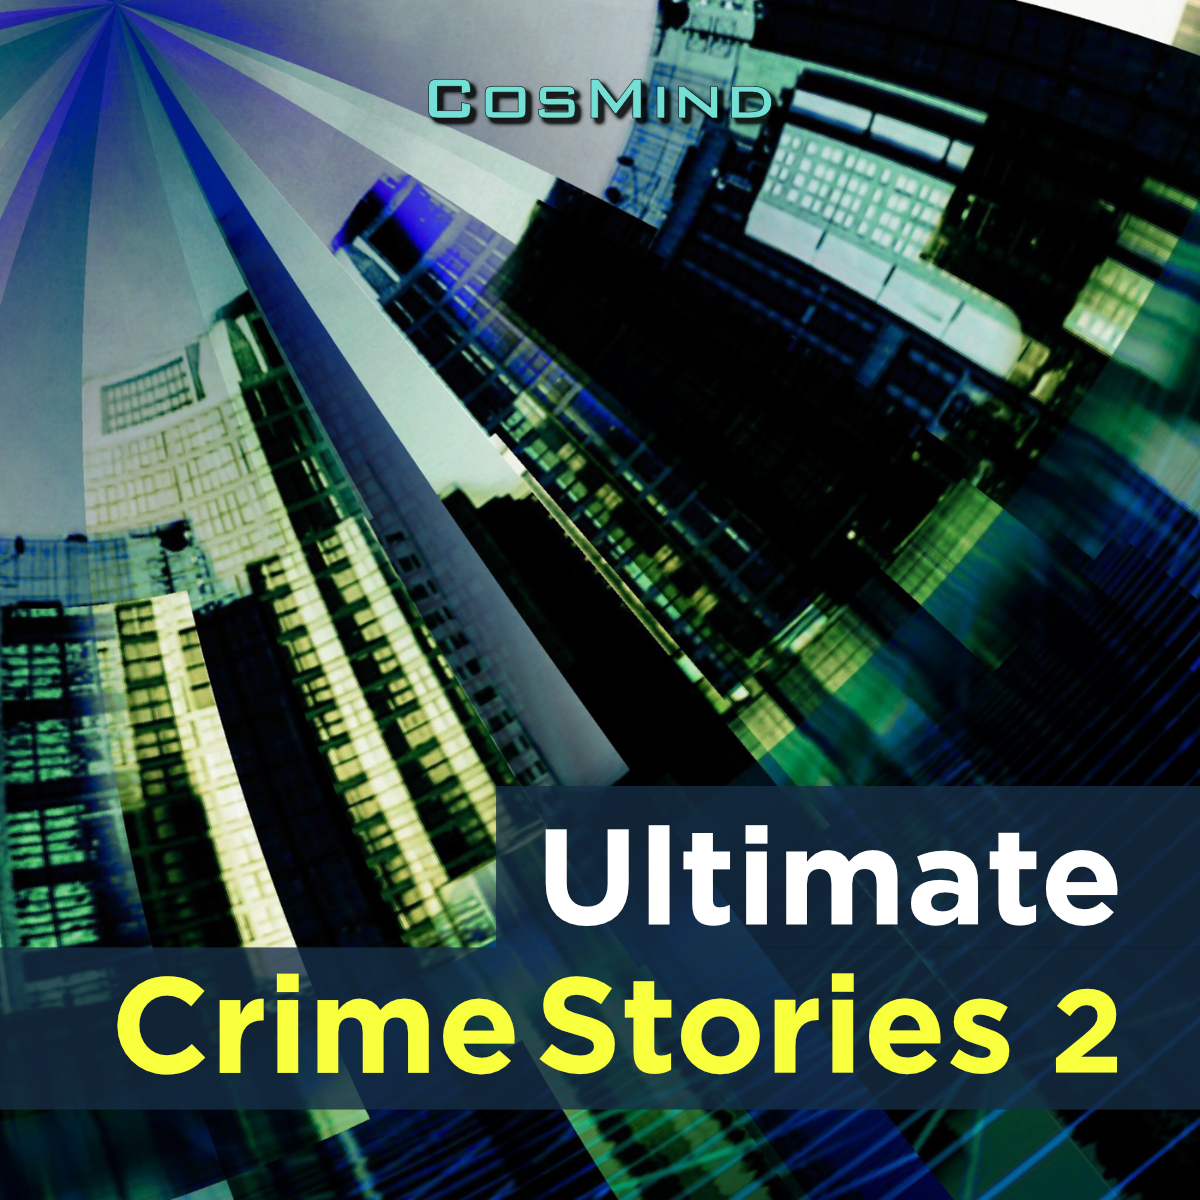 Ultimate Crime Stories 2